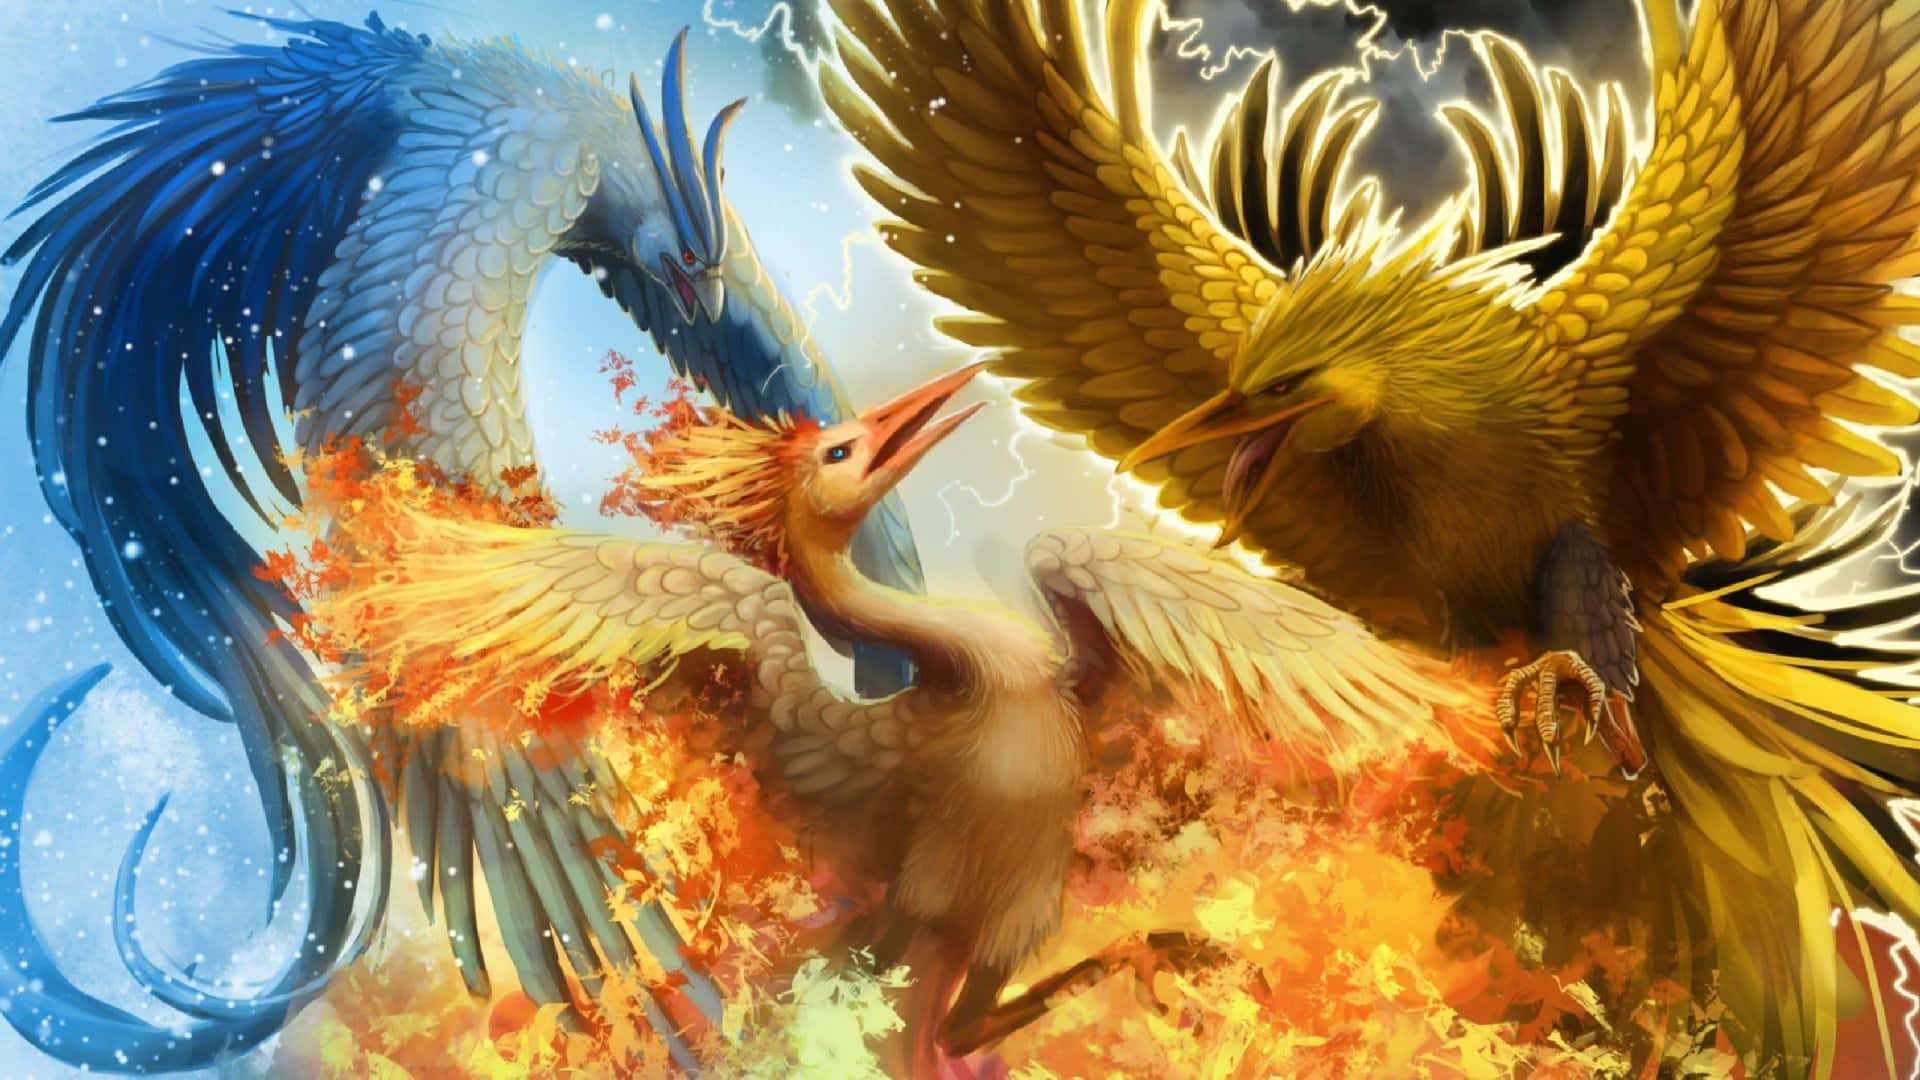 Zapdos, Moltres, And Articuno Fighting Wallpaper